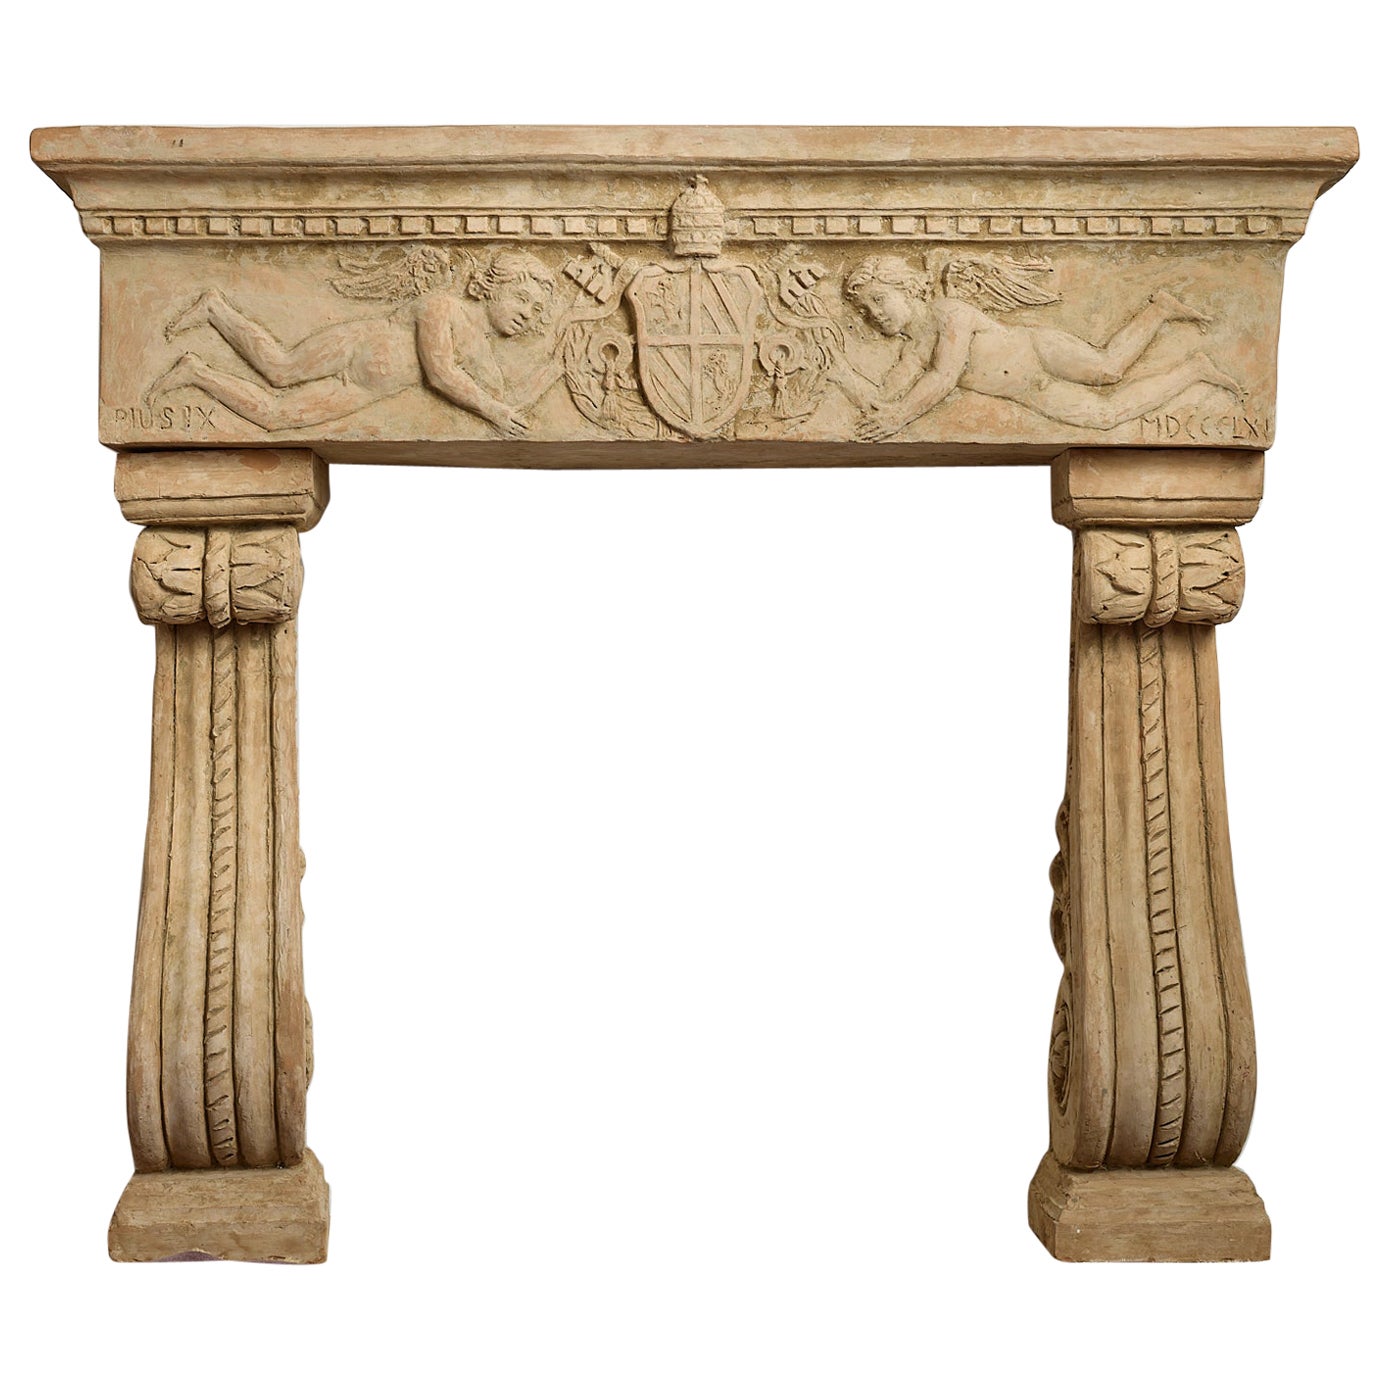 Fine Italian Terracotta Mantlepiece Early 20th Century For Sale